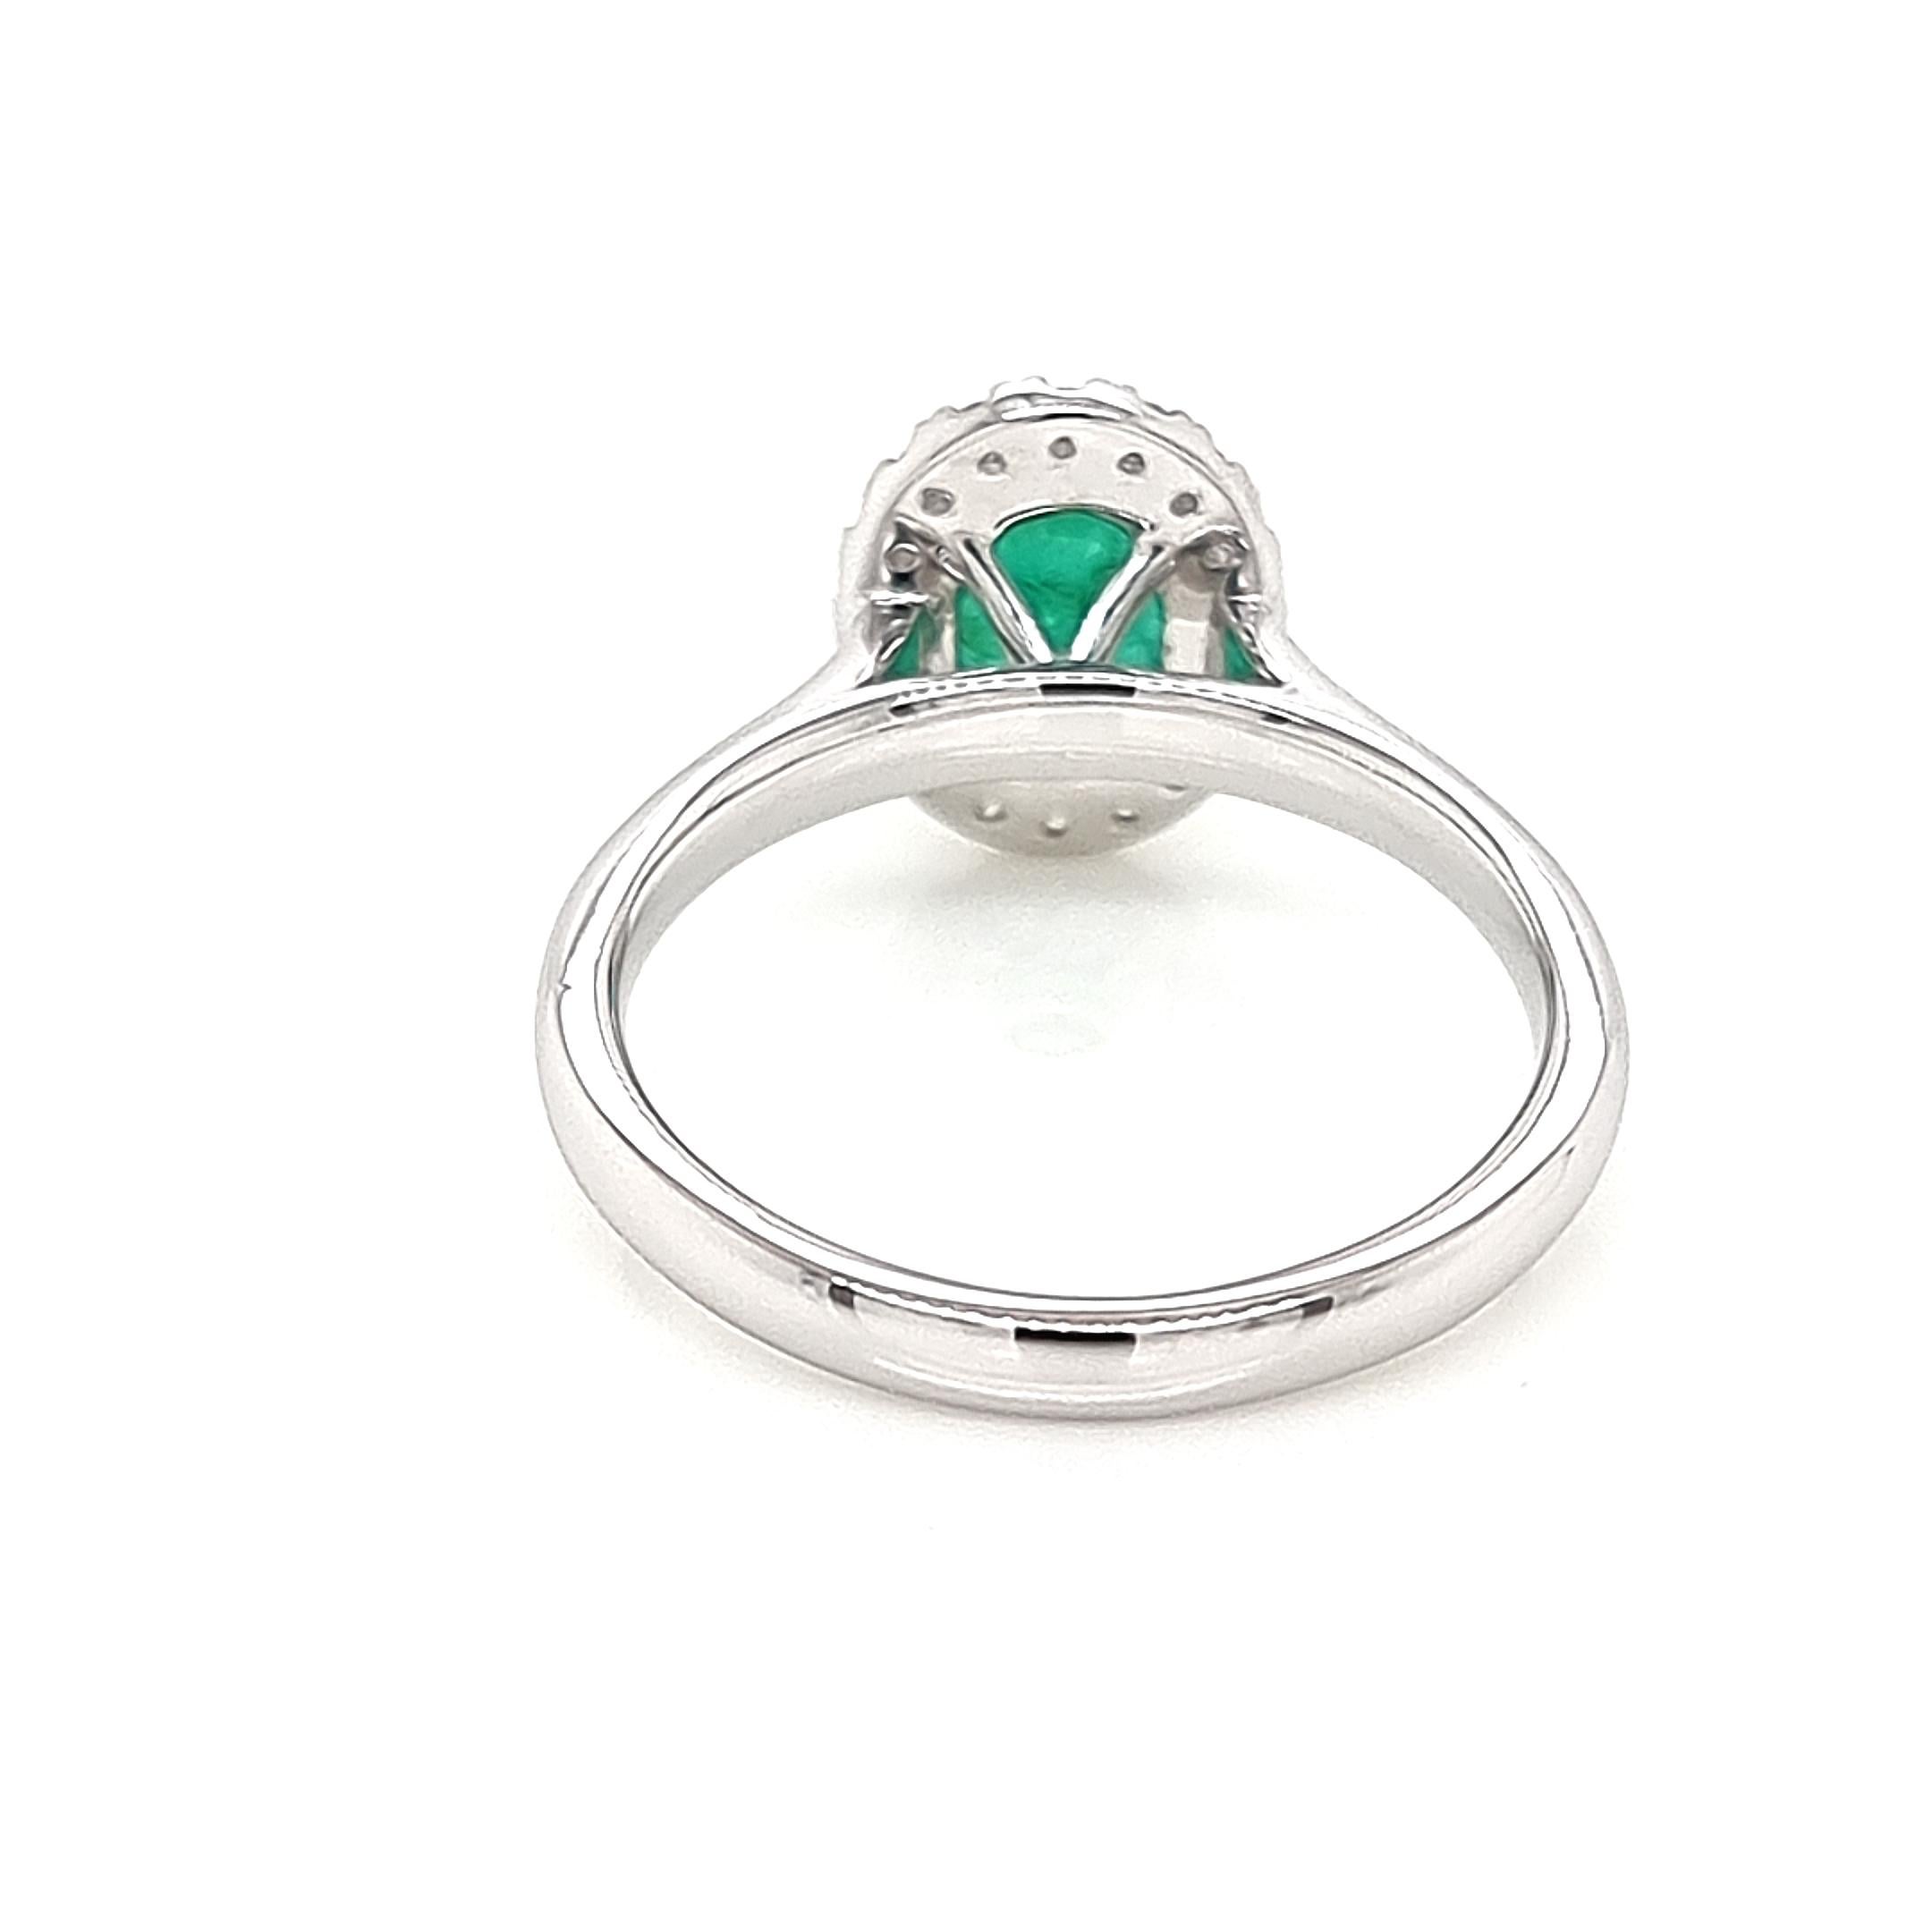 Oval Cut Zambian Emerald Halo Ring with White Diamonds made in 9K White Gold For Sale